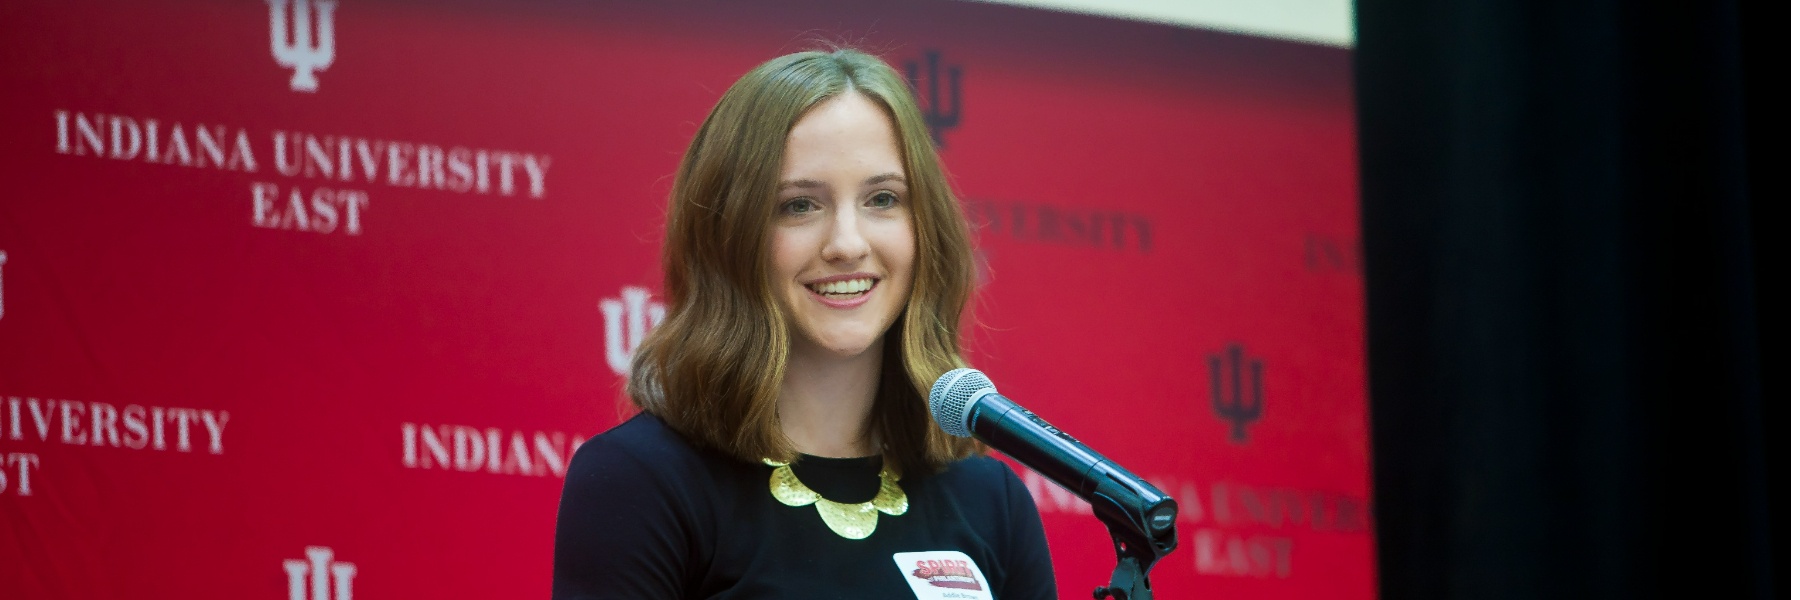 IU East student Addie Brown speaking at an event.